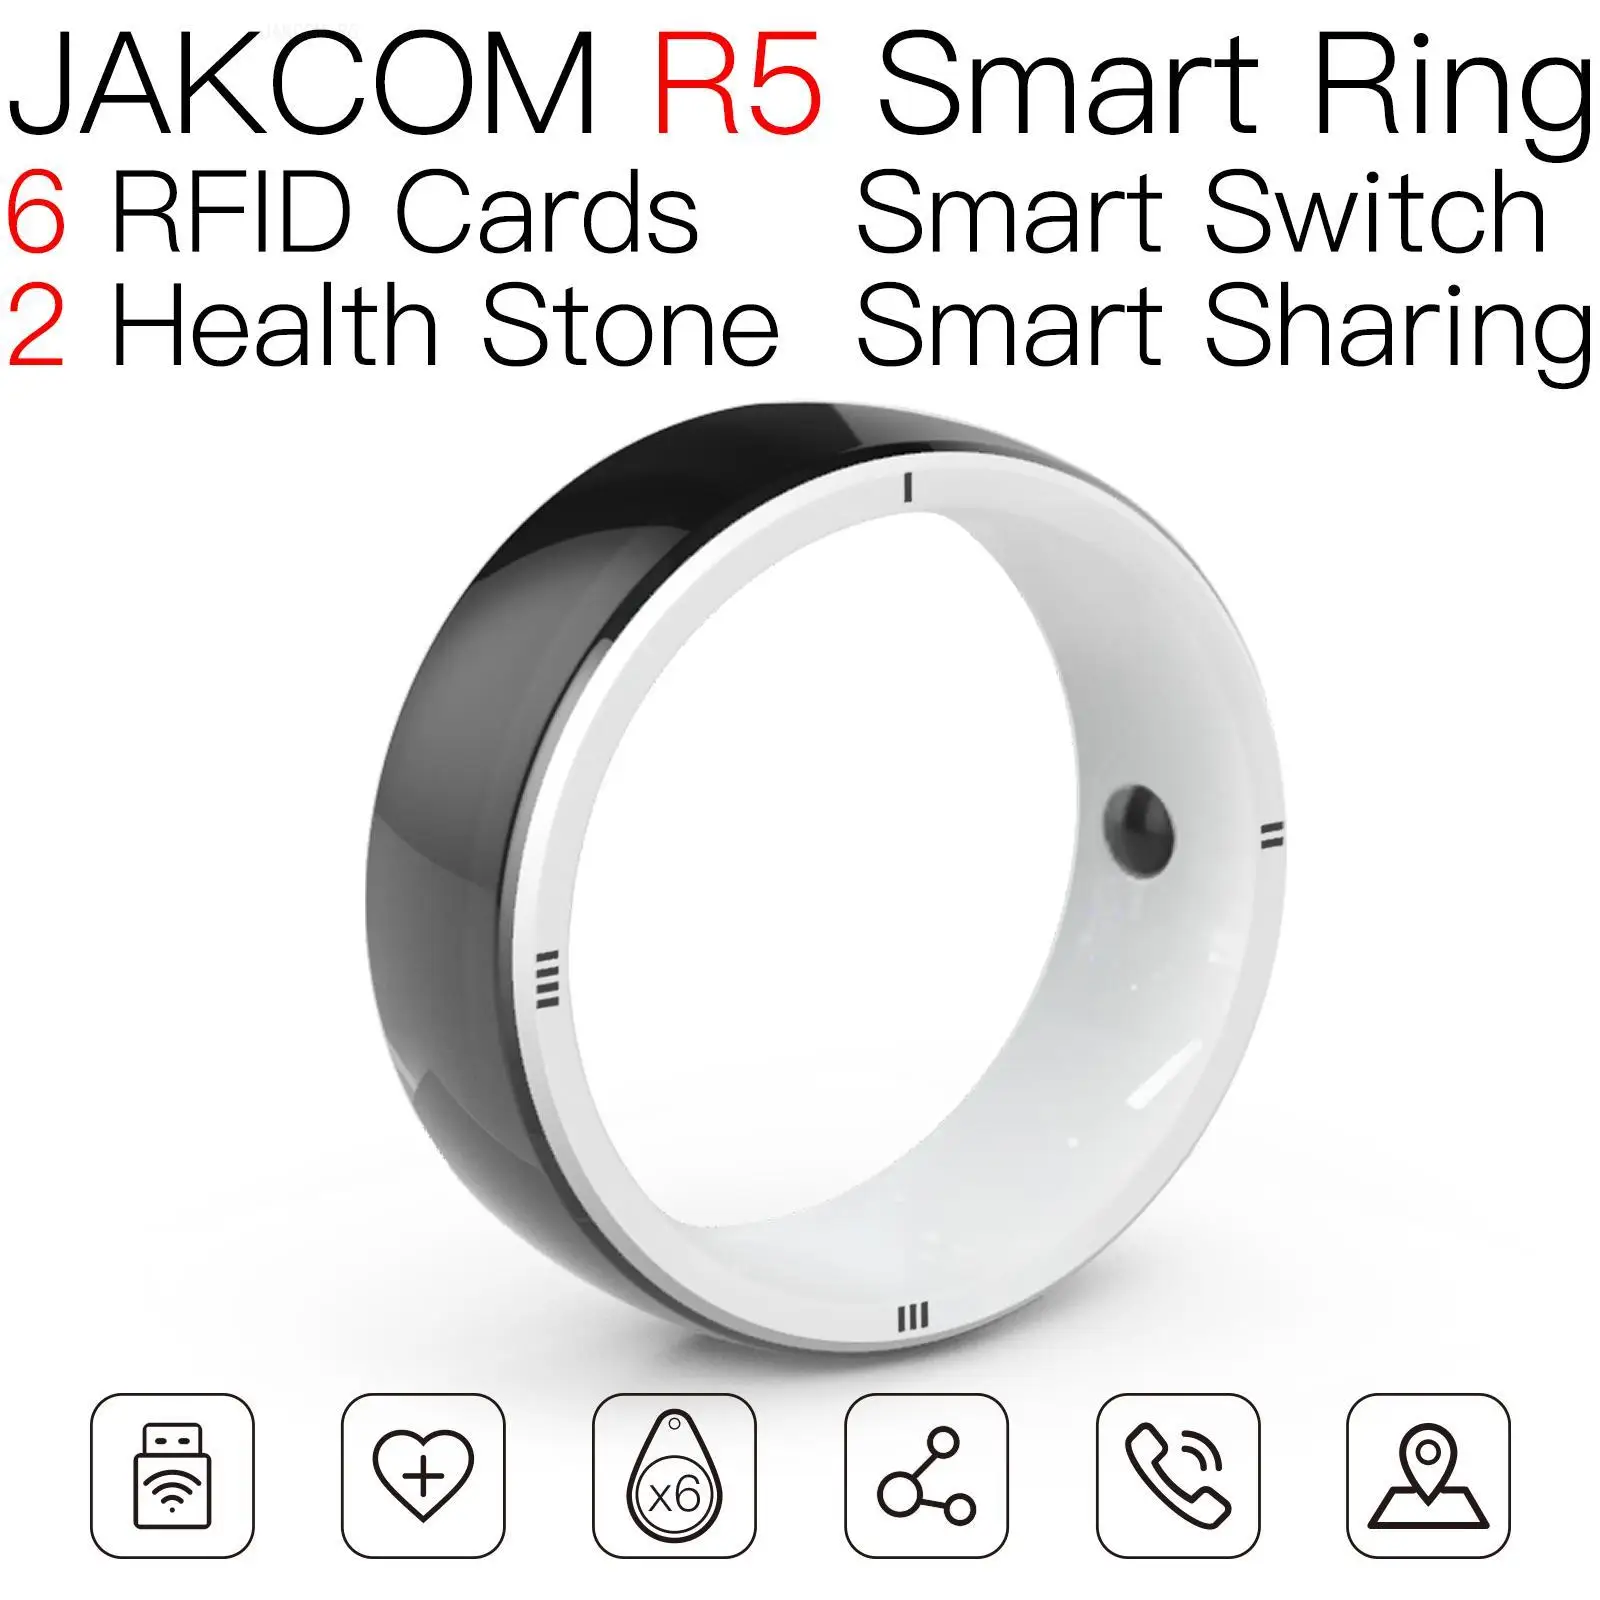 

JAKCOM R5 Smart Ring New product as craft blanks dog tag rfid hf face id tags name nfc uid changeable anti